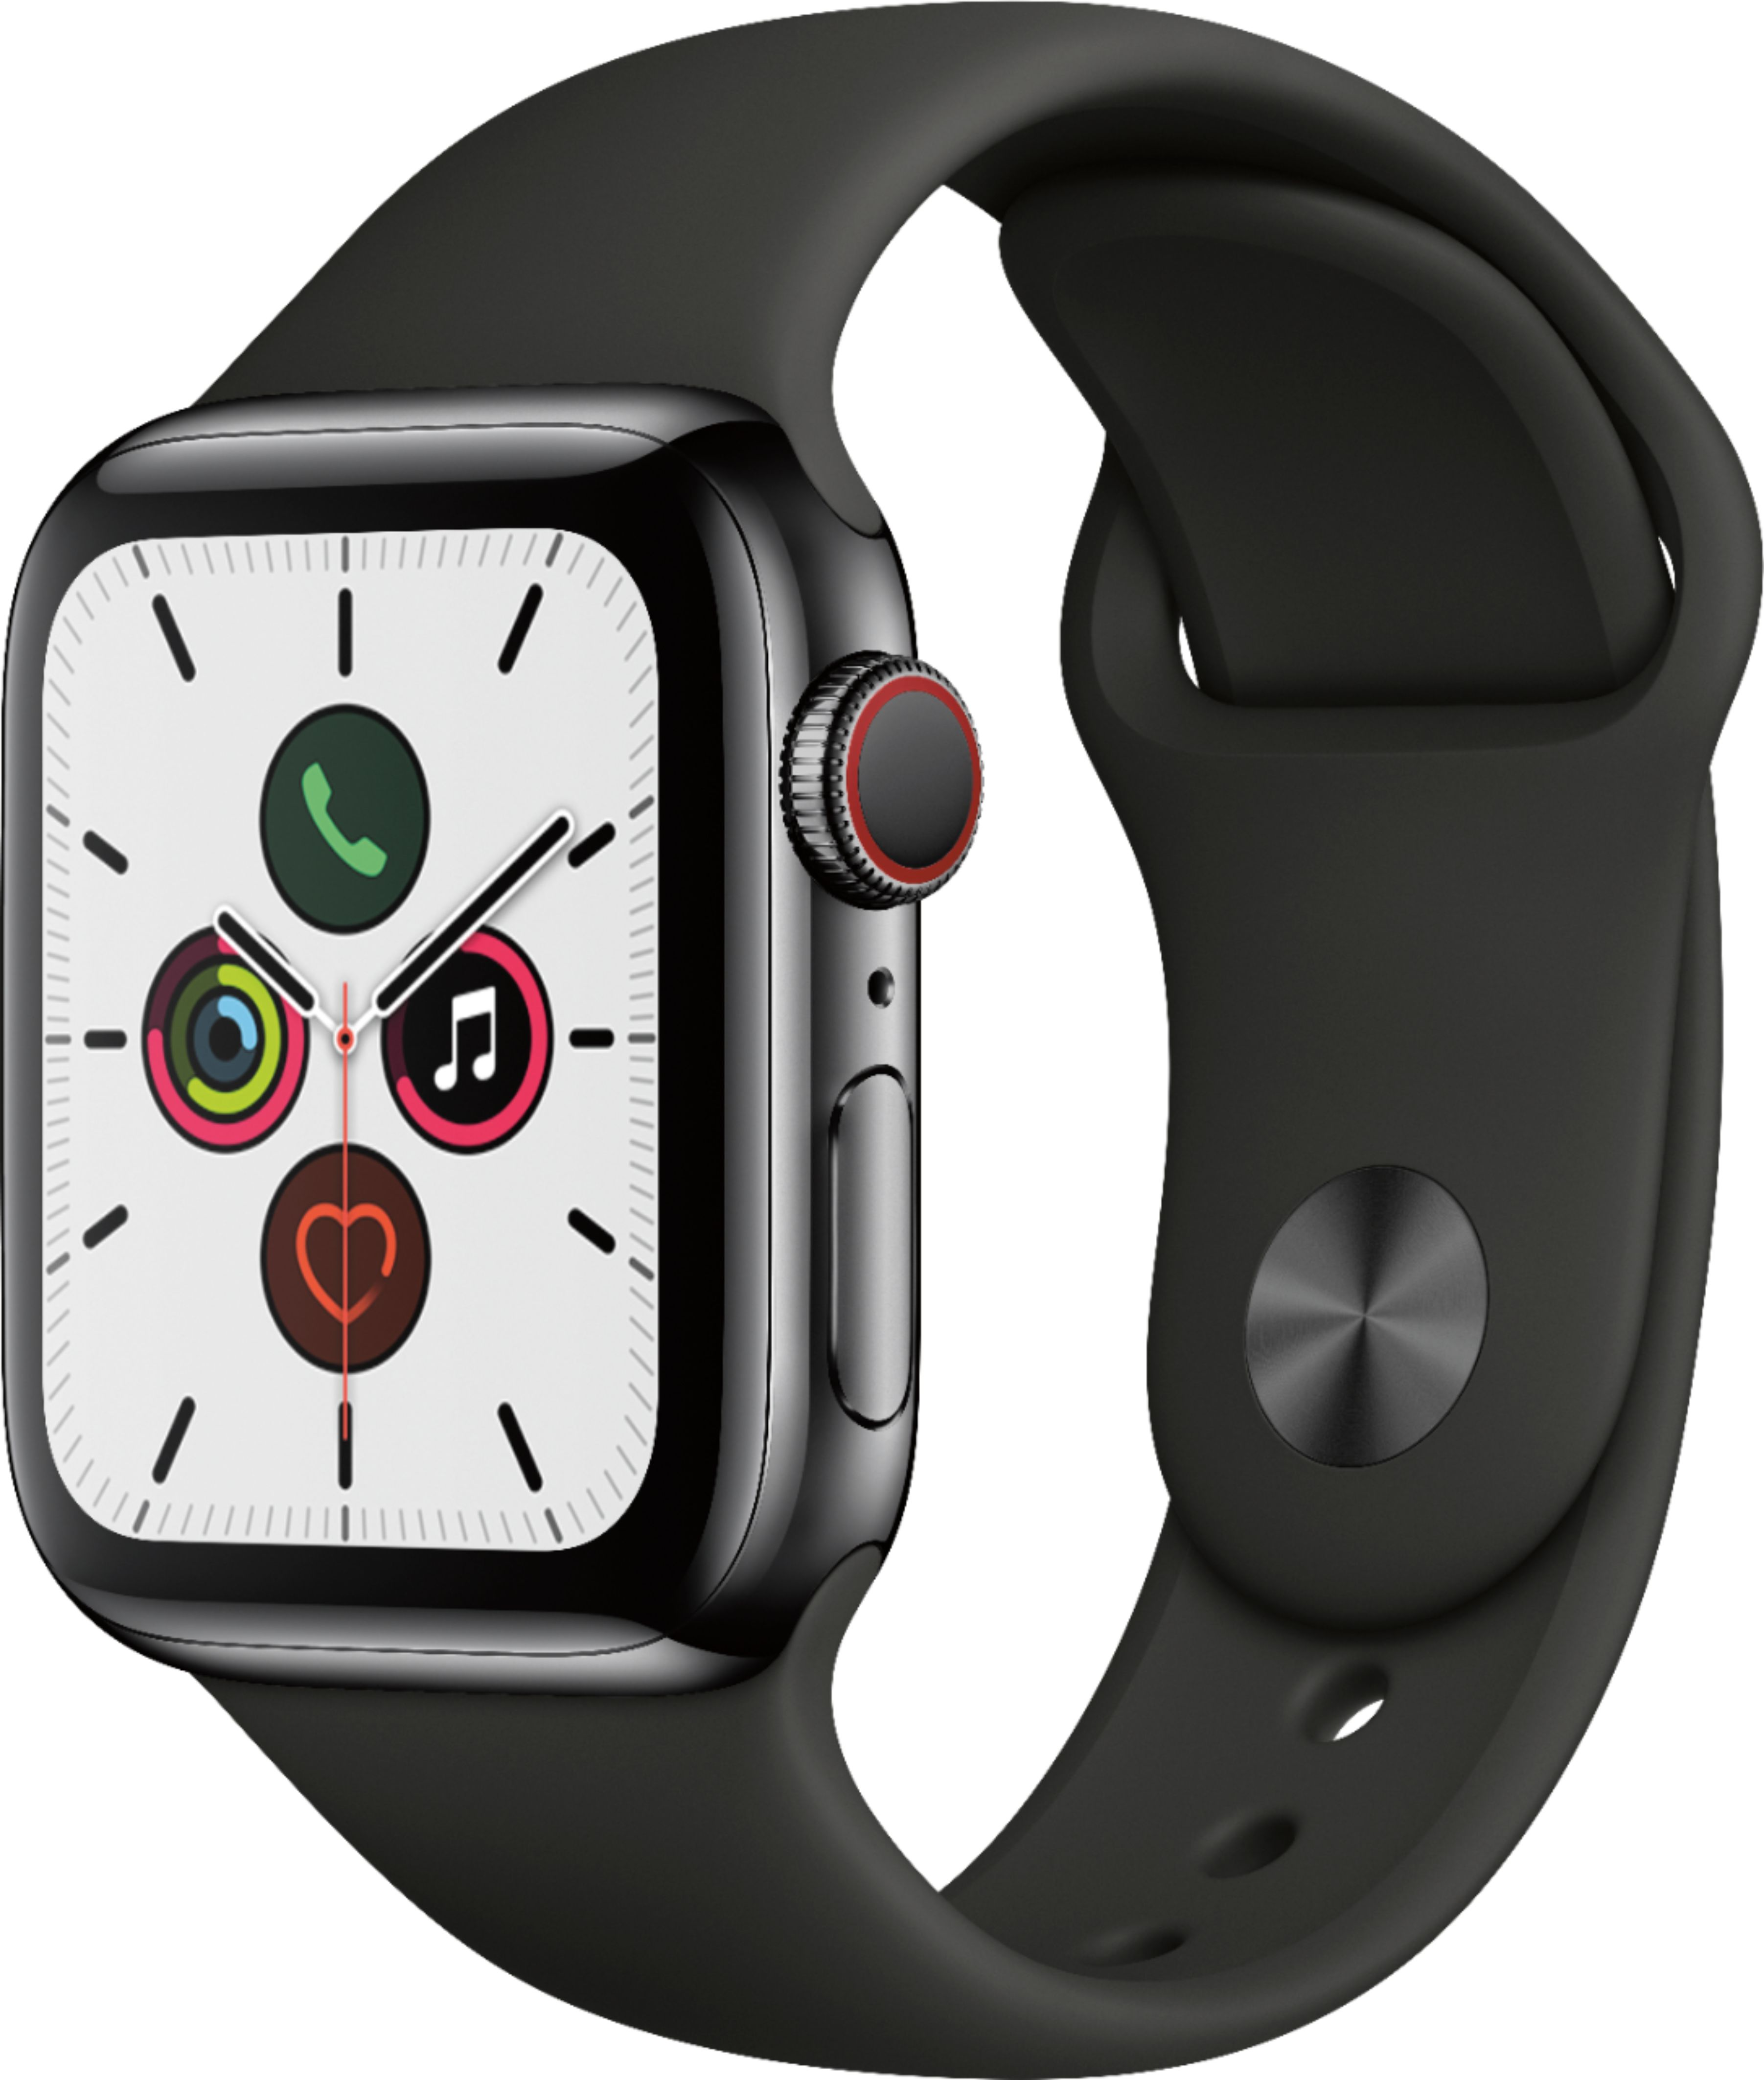 Apple Watch Series 5 (GPS + Cellular) 40mm Stainless Steel Case with Black Sport Band Space Black Stainless Steel MWWW2LL/A - Best Buy $299.99